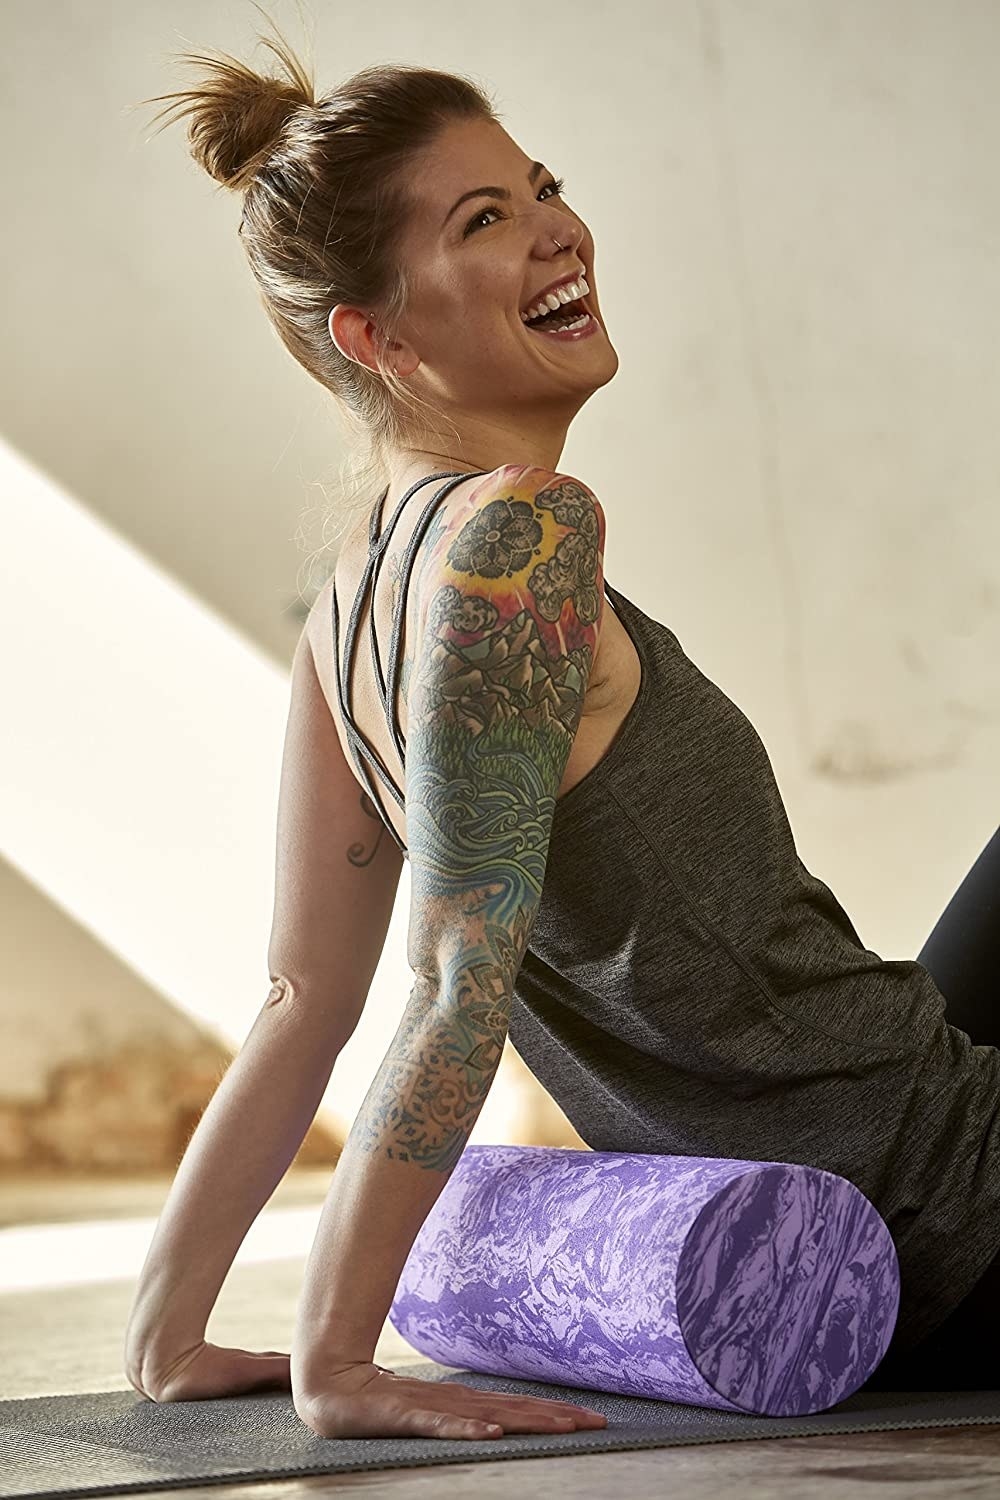 A smiling person using the foam roller while sitting on a yoga mat